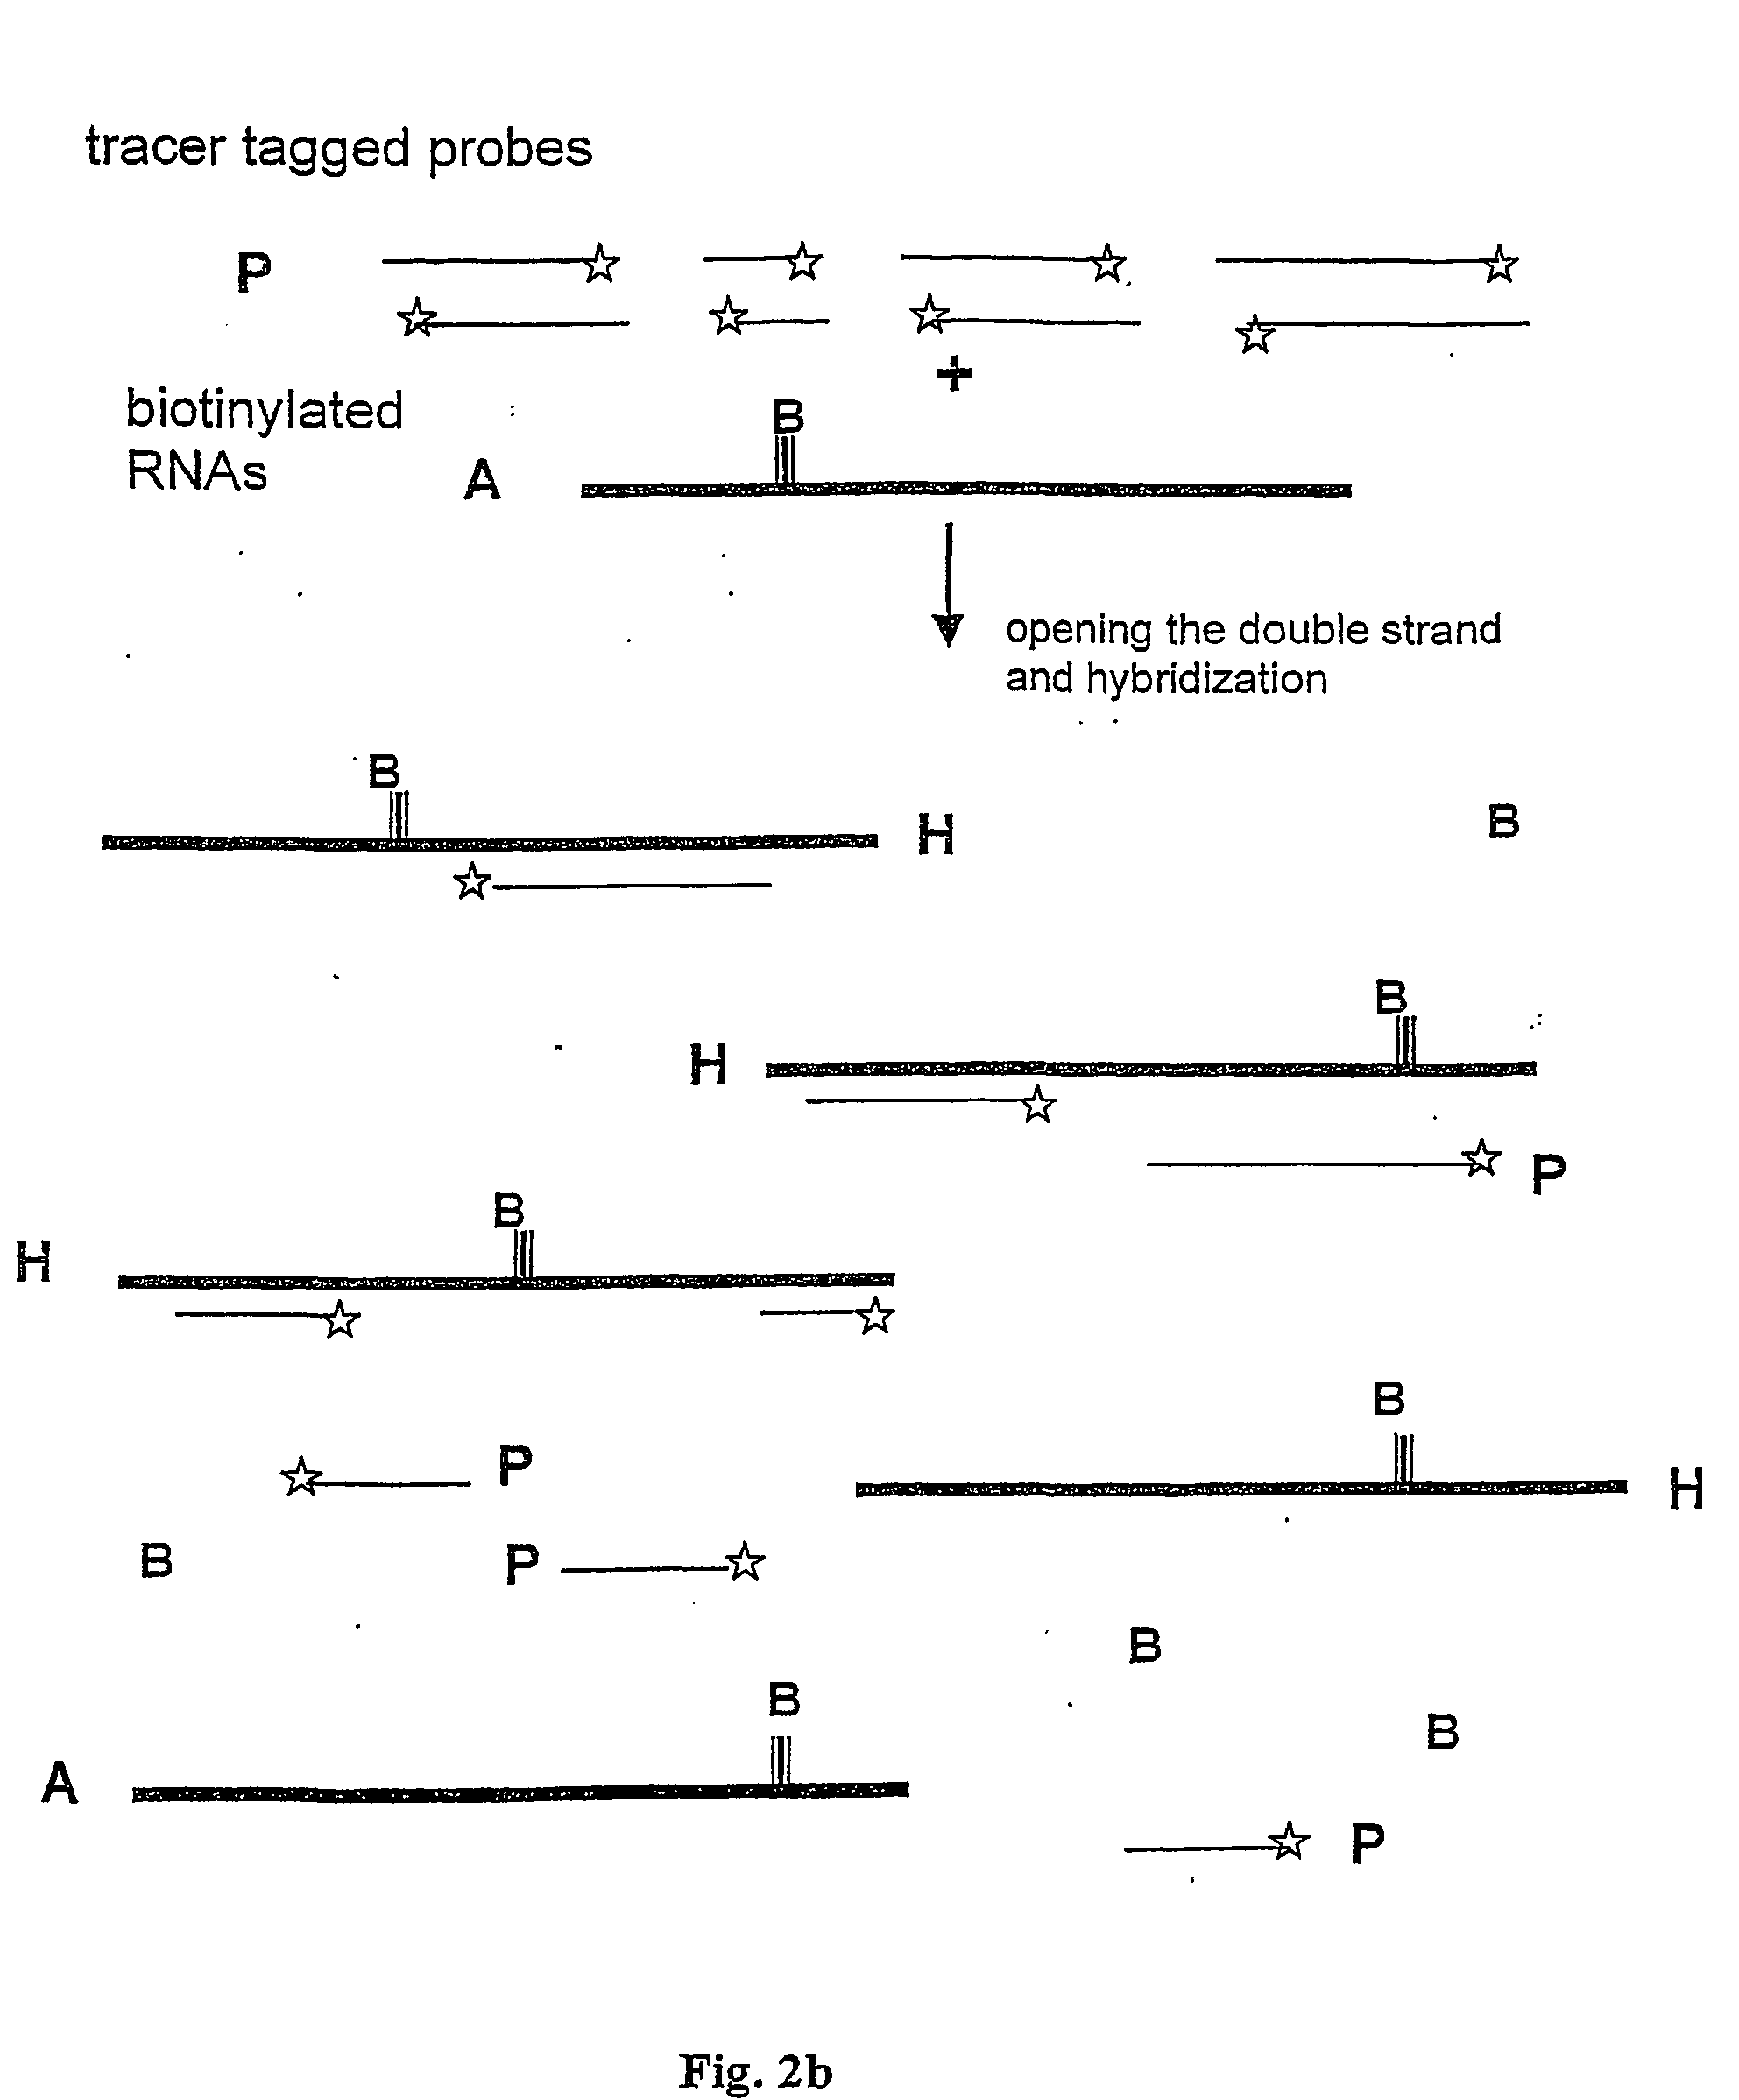 Method and test kit for quantitative determination of variations in polynucleotide amounts in cell or tissue samples